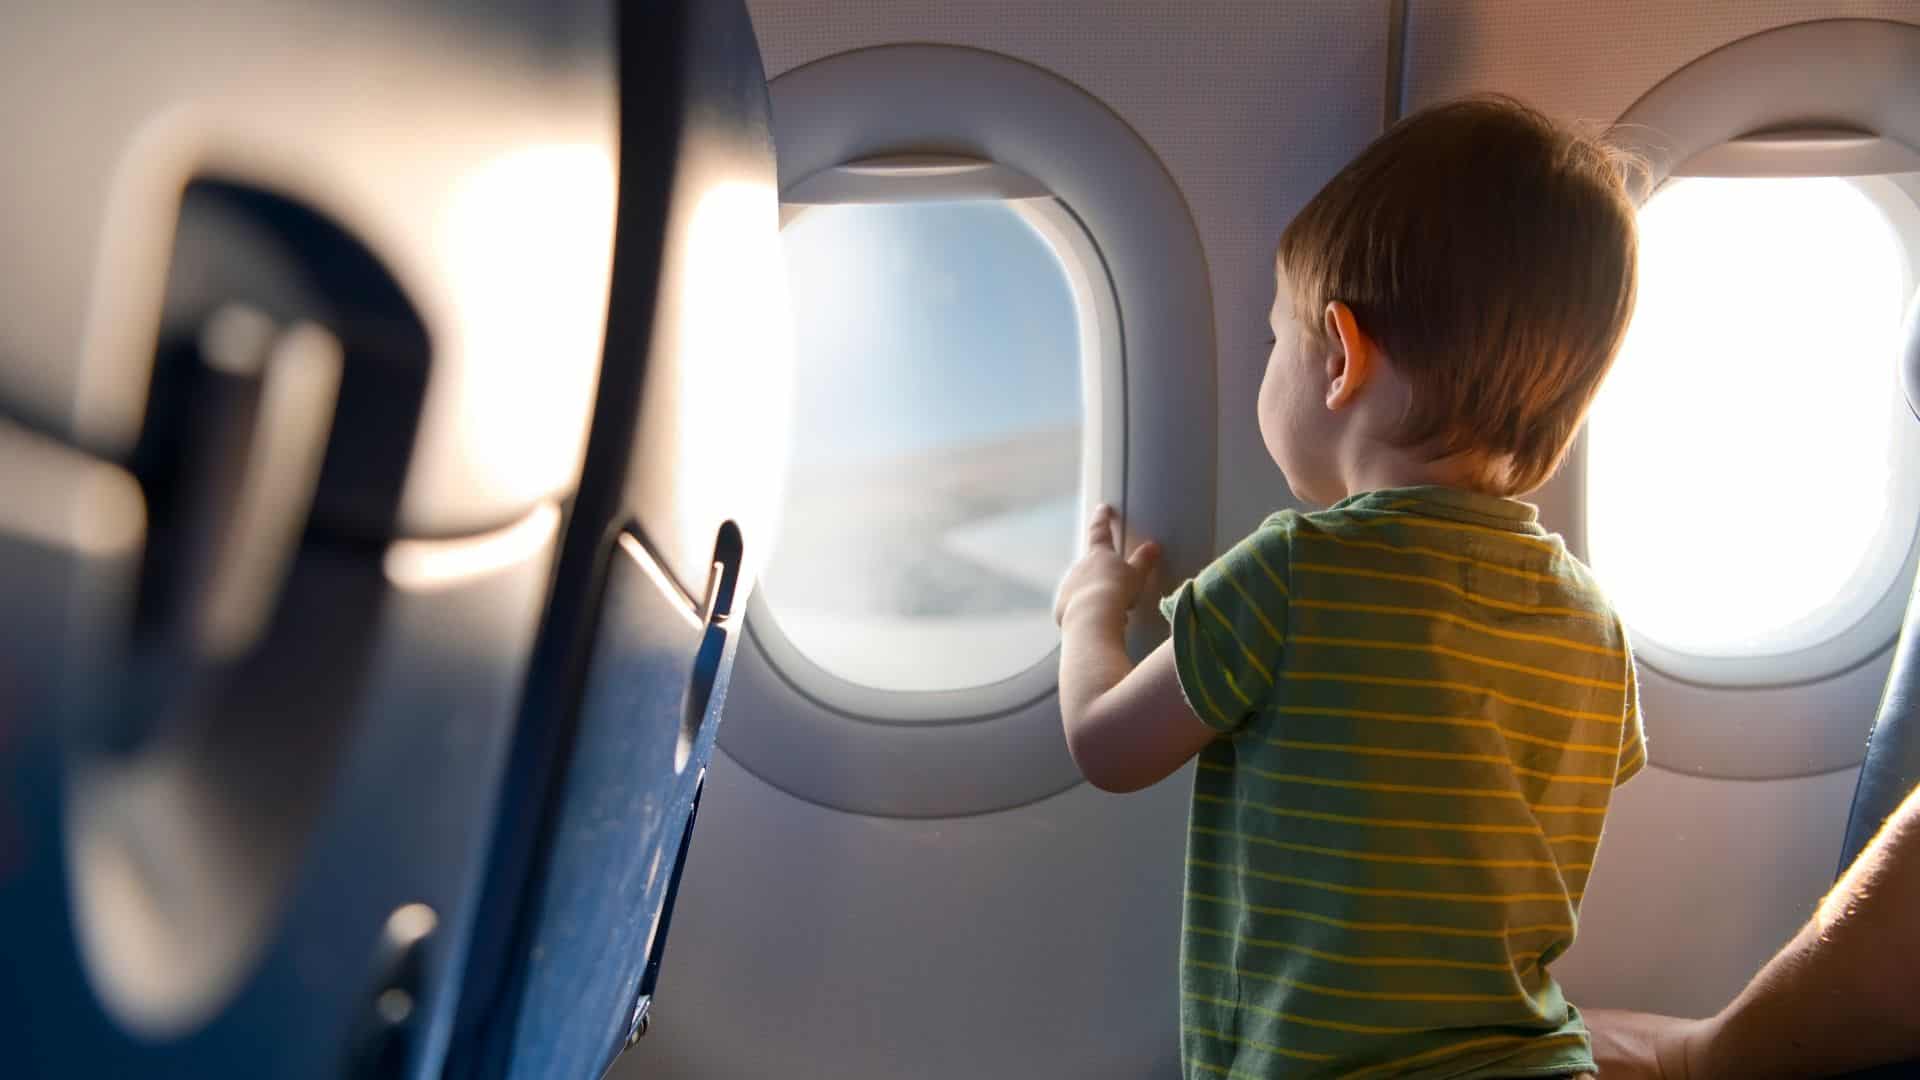 Do You Need a Flight Ticket for 2 Year Old?